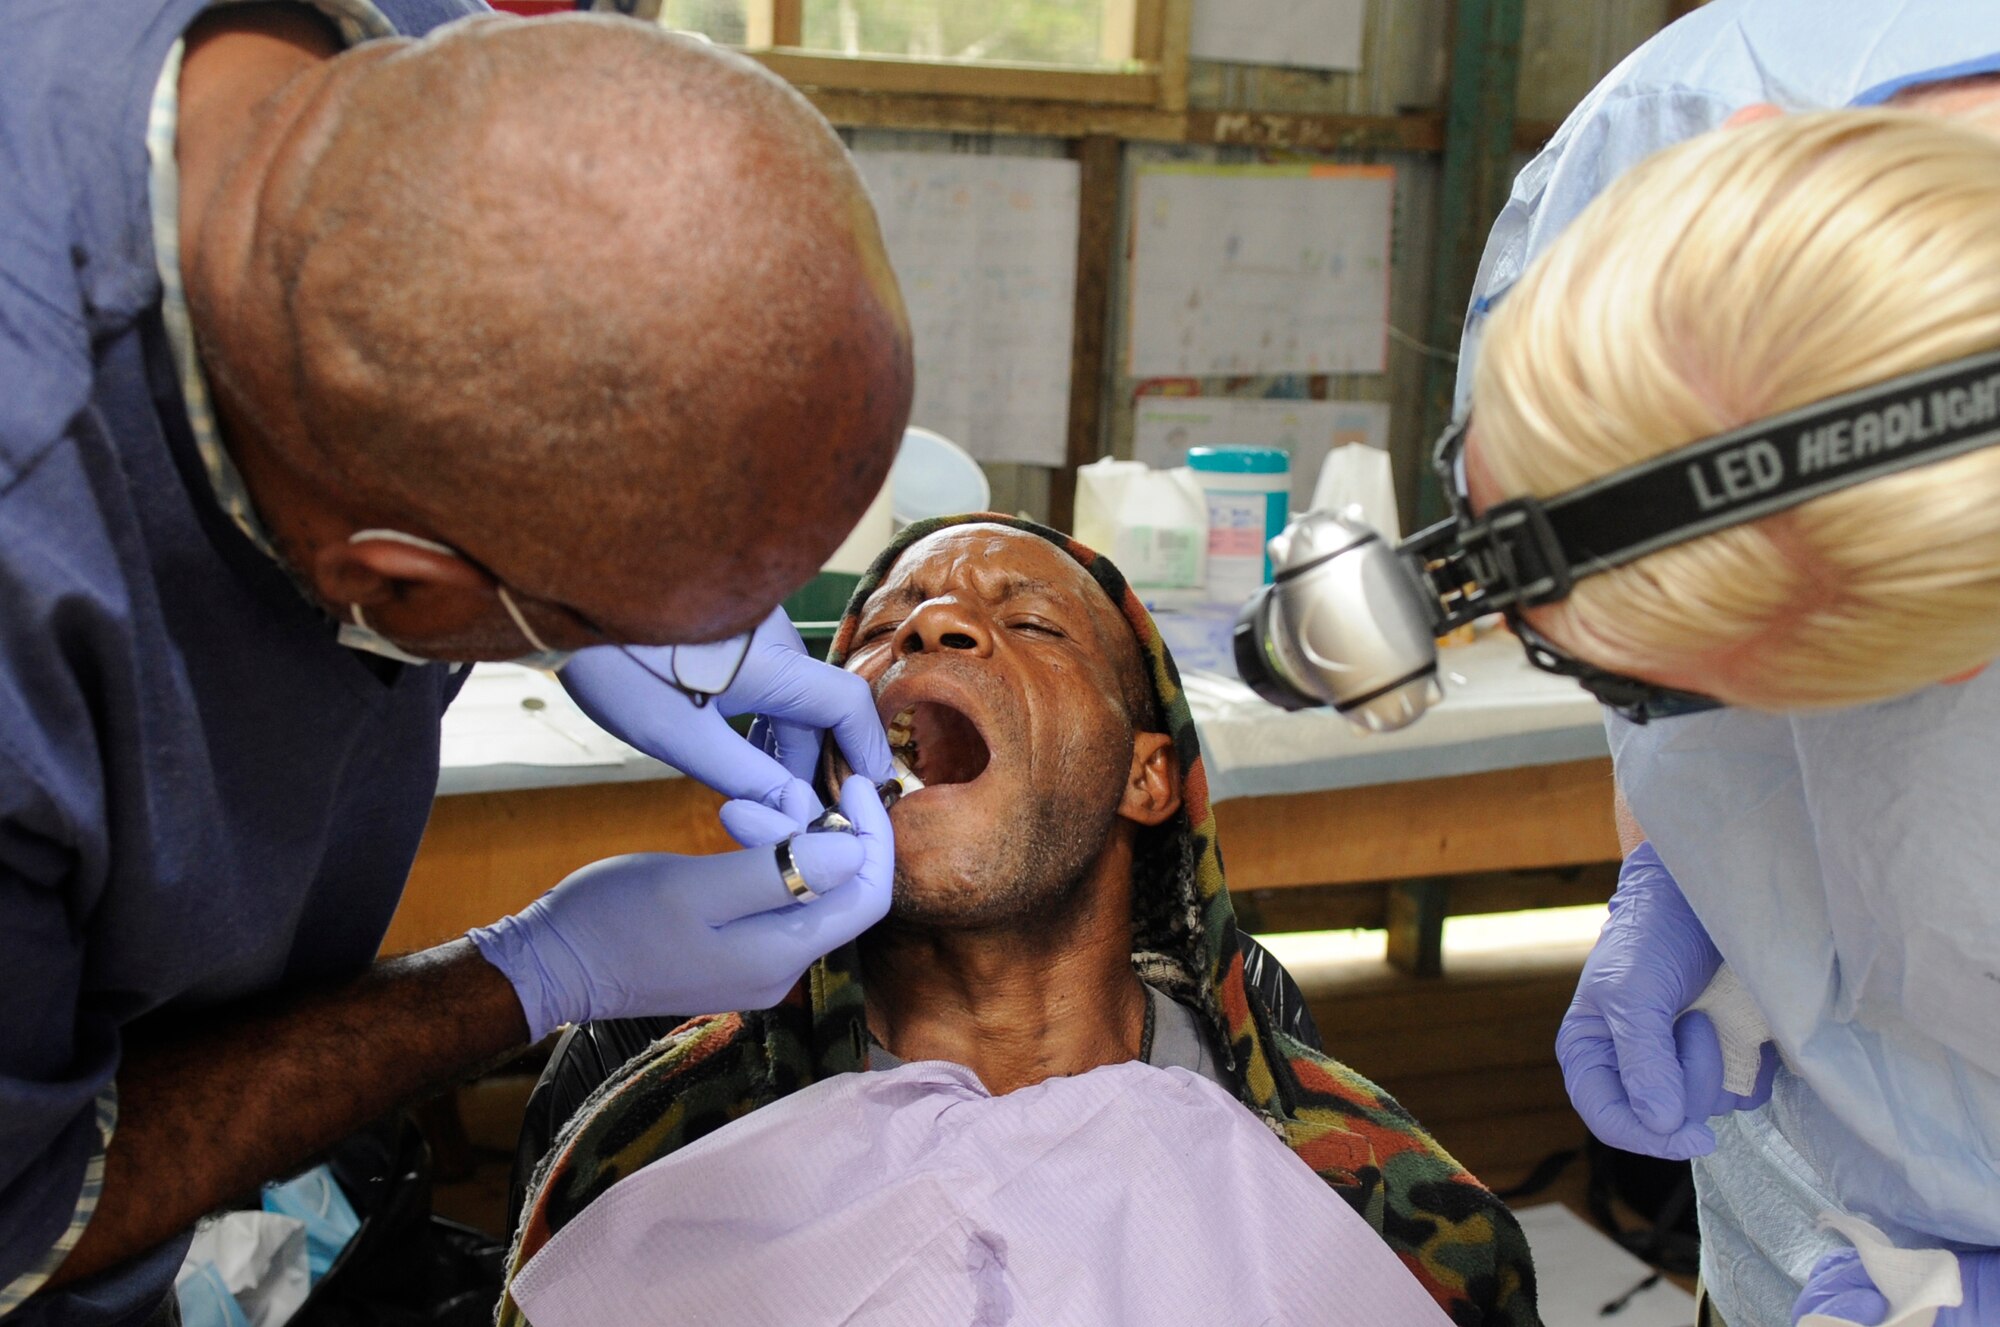 A local Papua New Guinea health services dentist numbs a patient???s mouth to remove a rotten tooth as an Australian Air Force dental technician assists him during Pacific Angel 15-4 at Unggai Primary School in Papua New Guinea, June 1, 2015. Pacific Angel is a U.S Pacific Command multilateral humanitarian assistance civil military operation, which improves military-to-military partnerships in the Pacific while also providing medical health outreach, civic engineering projects and subject matter exchanges among partner forces. (U.S. Air Force photo by Staff Sgt. Marcus Morris/Released)